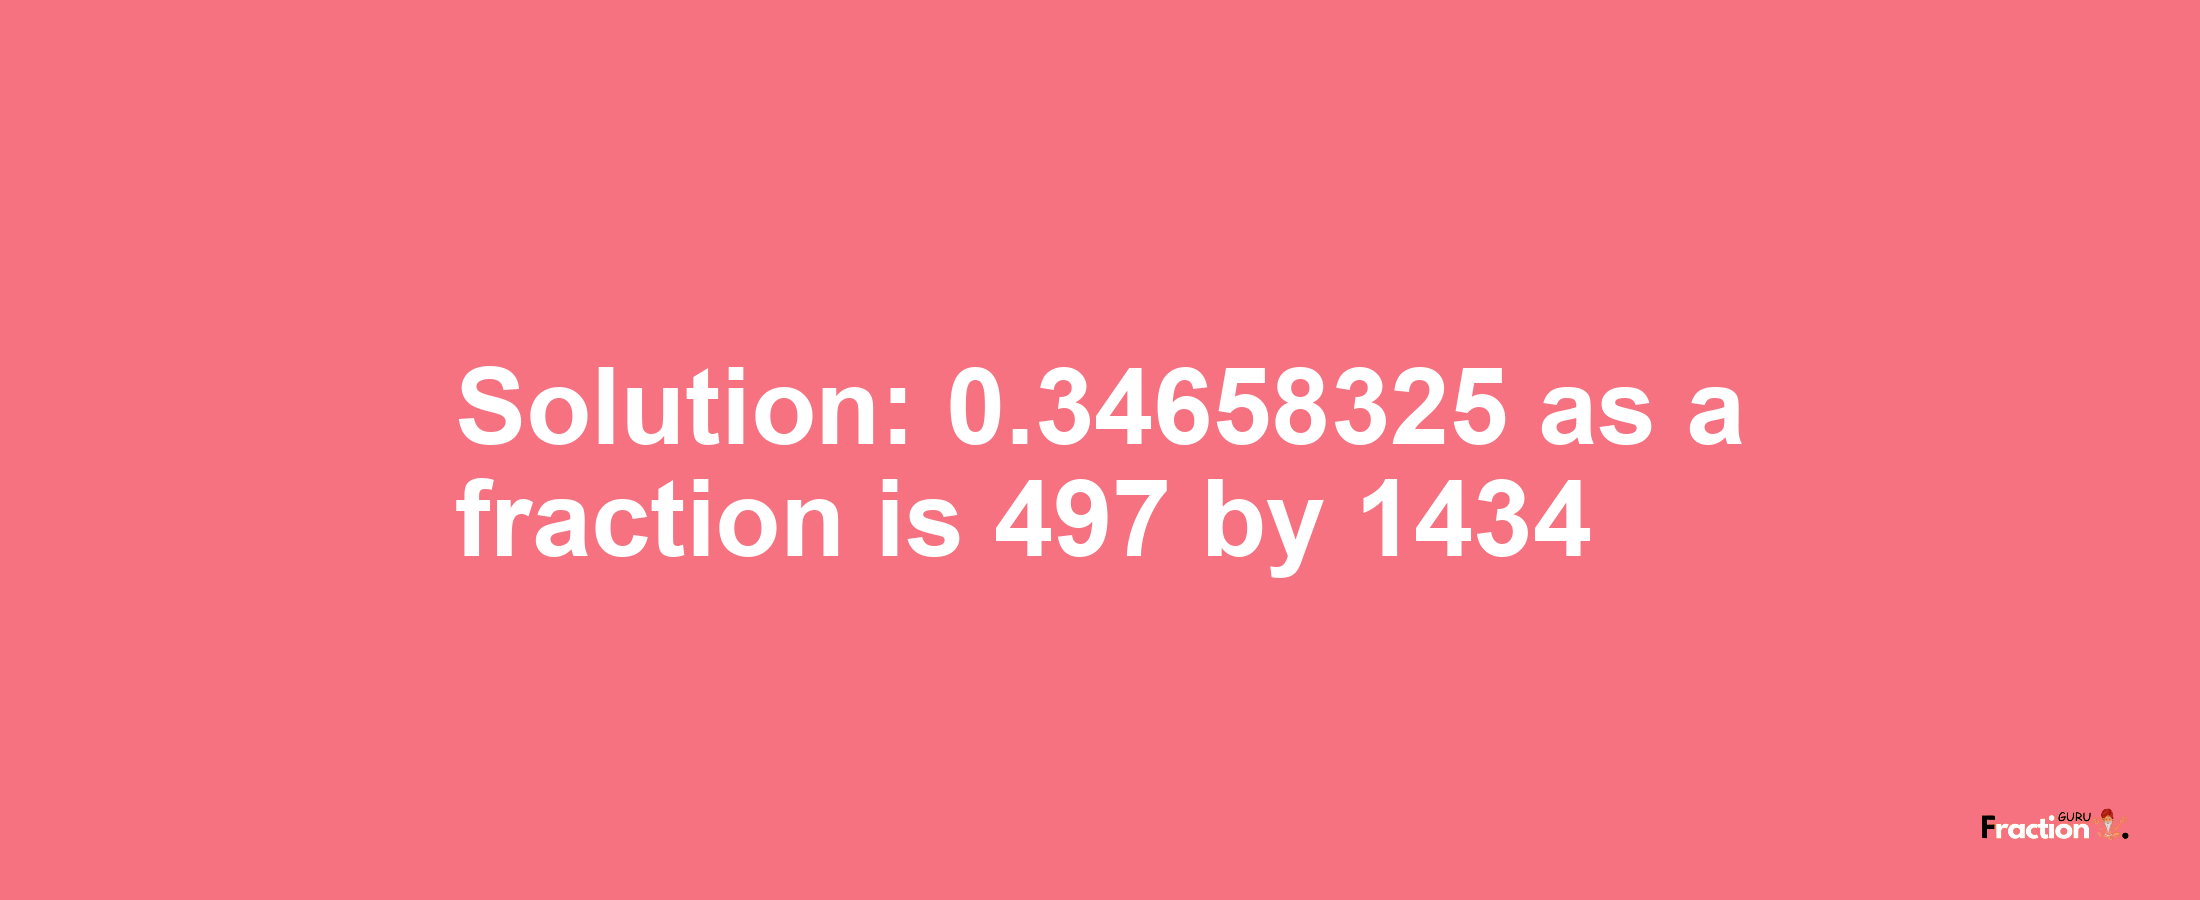 Solution:0.34658325 as a fraction is 497/1434